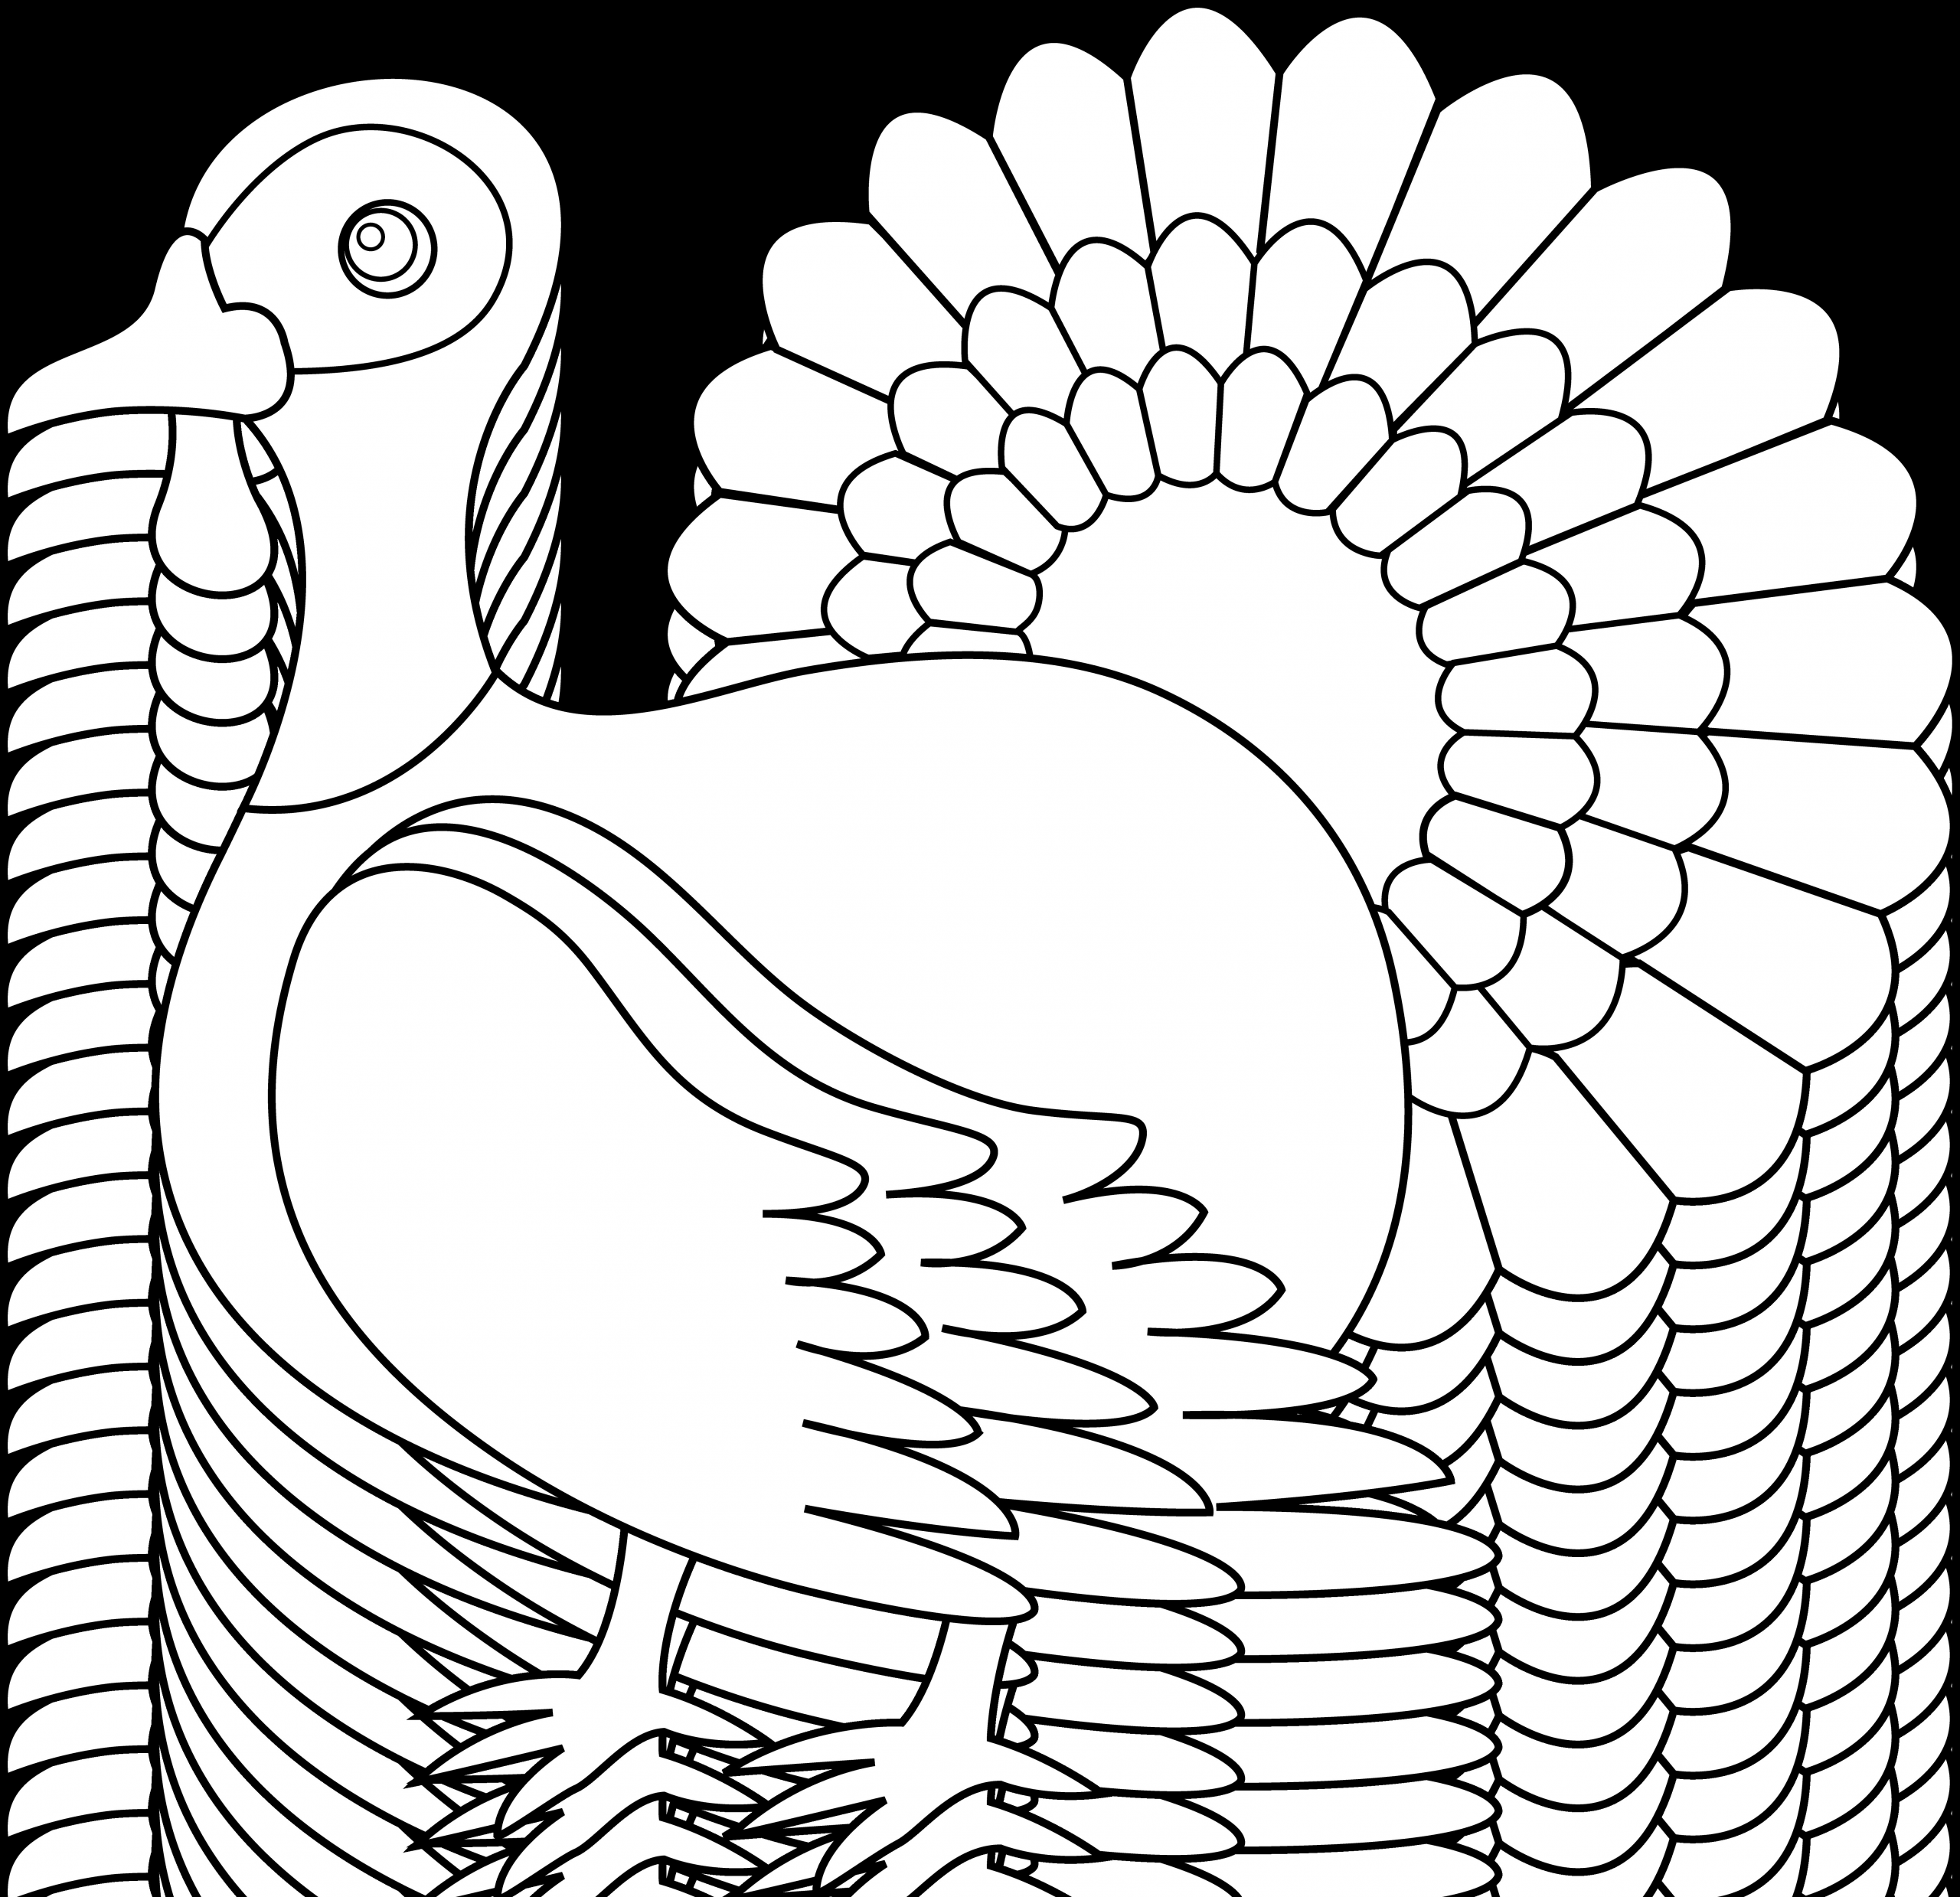 Thanksgiving Turkey Clipart Black And White
 Free Thanksgiving Clip Art Black And White